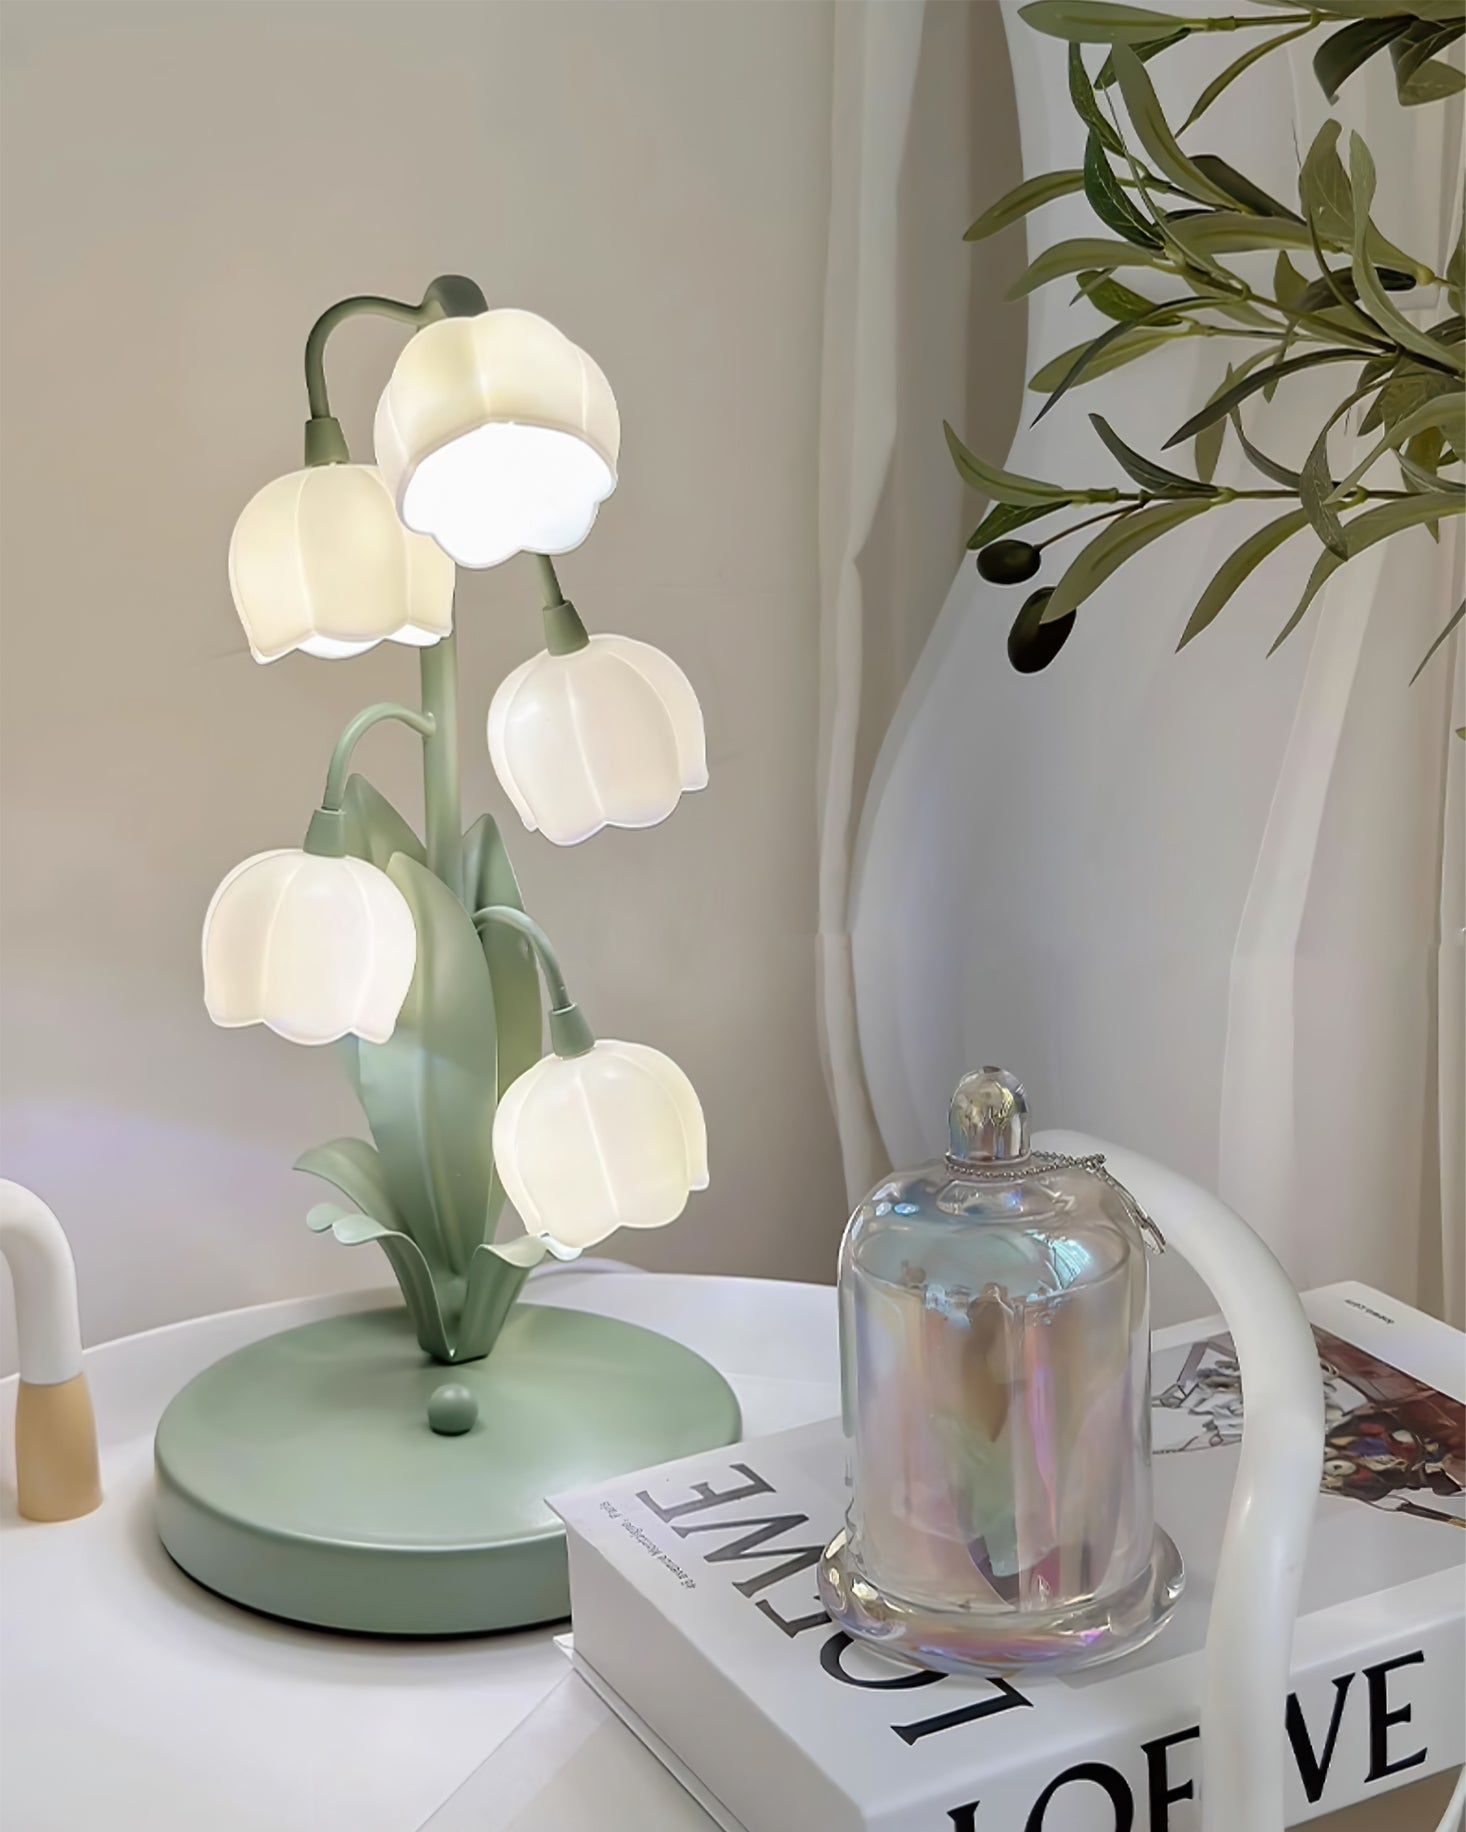 Lamps For The Home : Brighten Up Your Home with Stylish Lamps